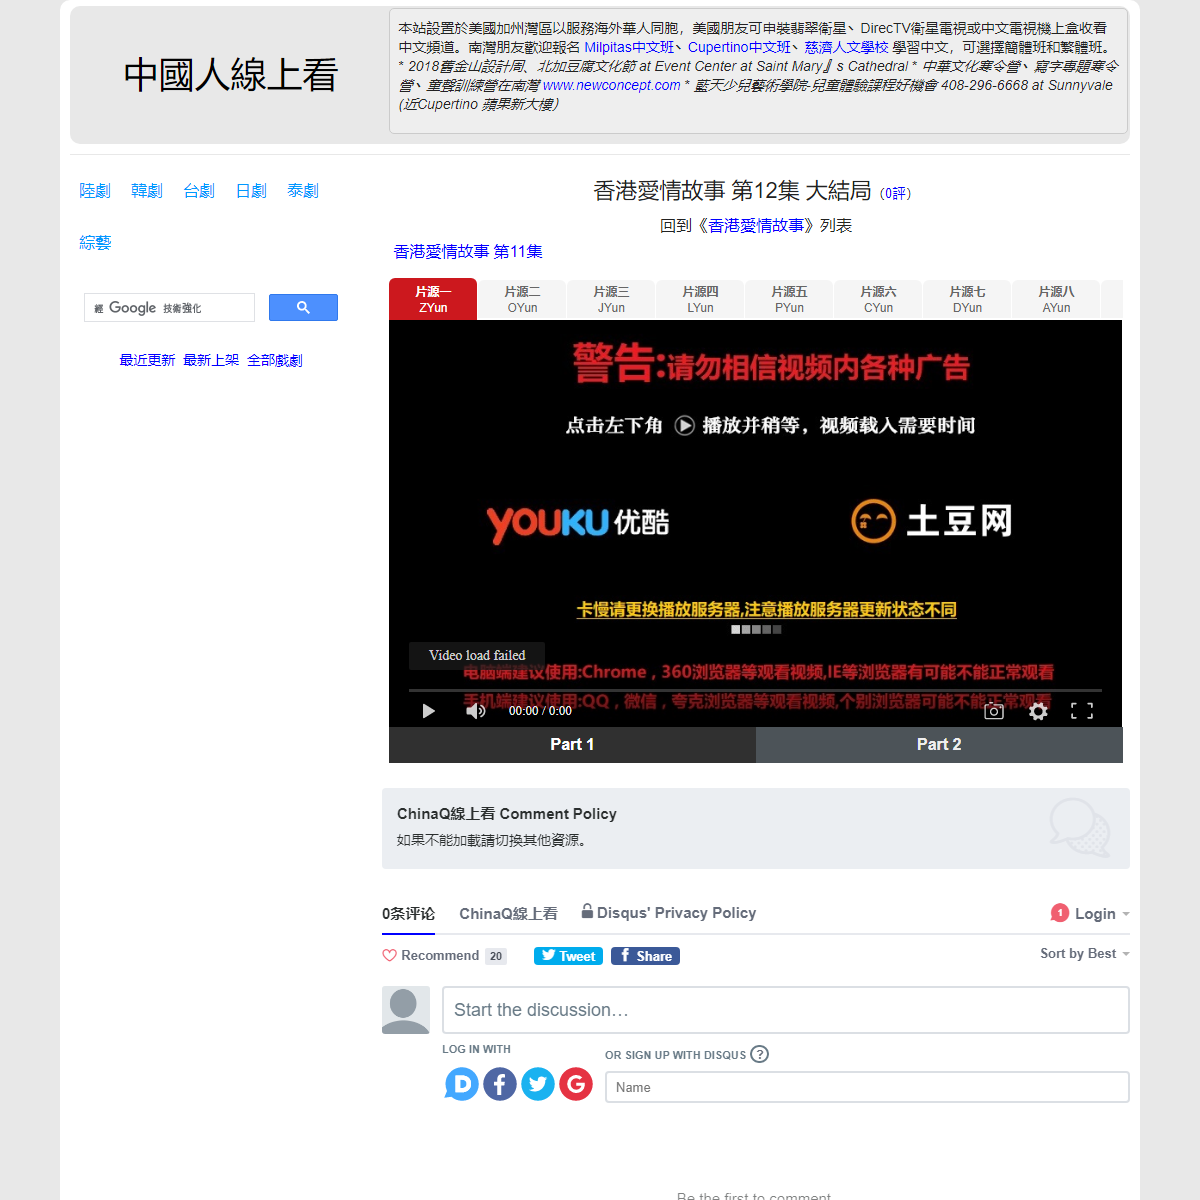 A complete backup of https://chinaq.tv/hk201207/12.html